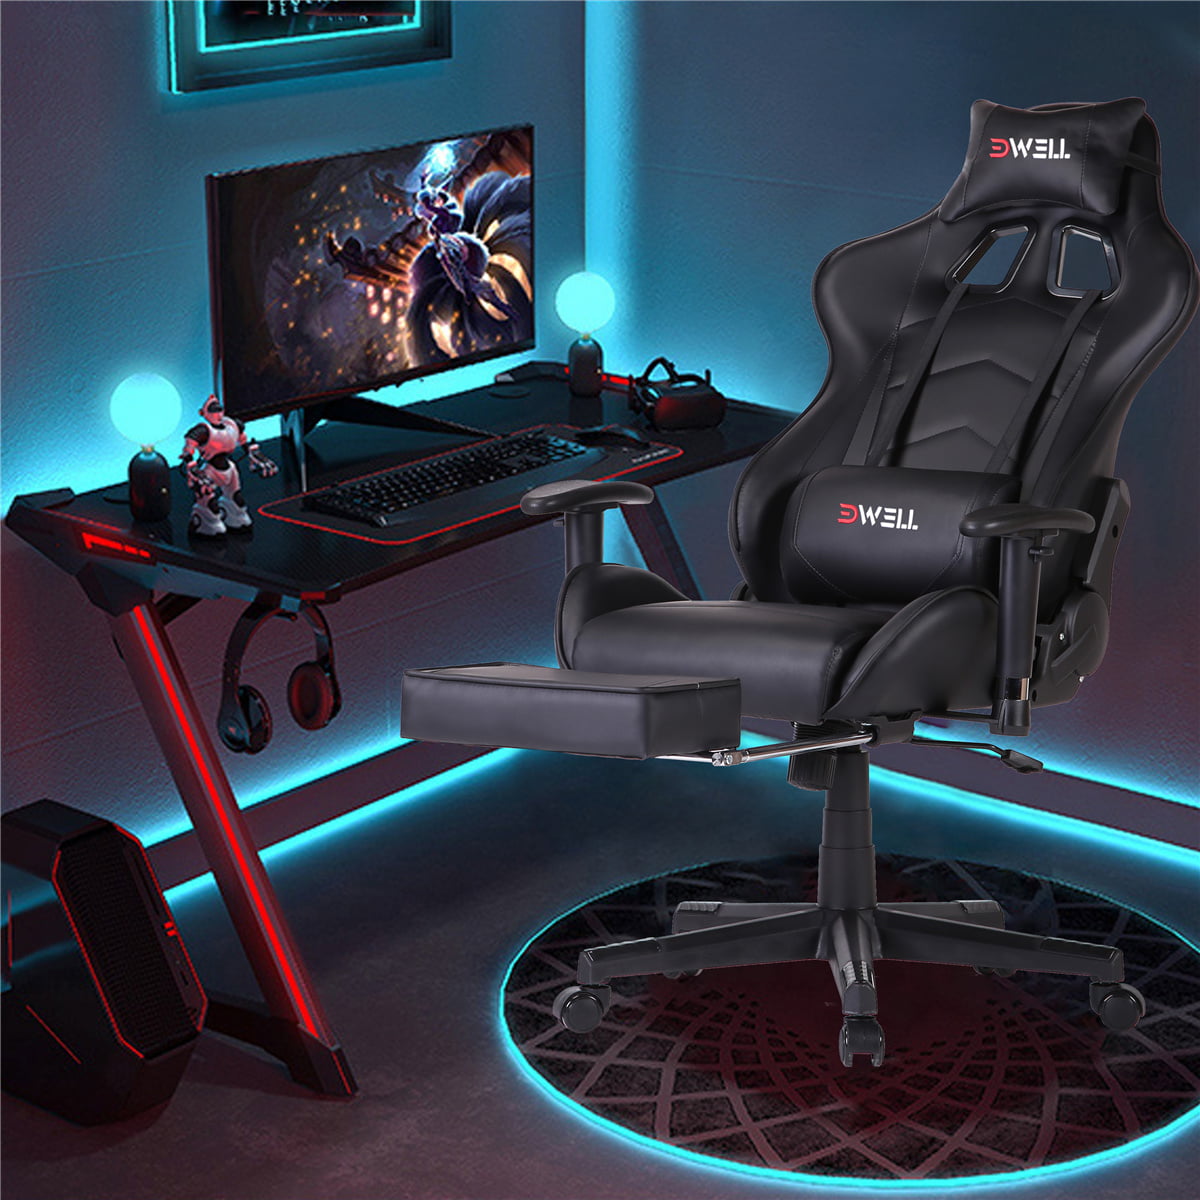 EDWELL Ergonomic Gaming Chair with Headrest and Lumbar Massage Support，Racing Style PC Computer Chair Height Adjustable Swivel with Retractable Footrest Executive Office Chair Black 